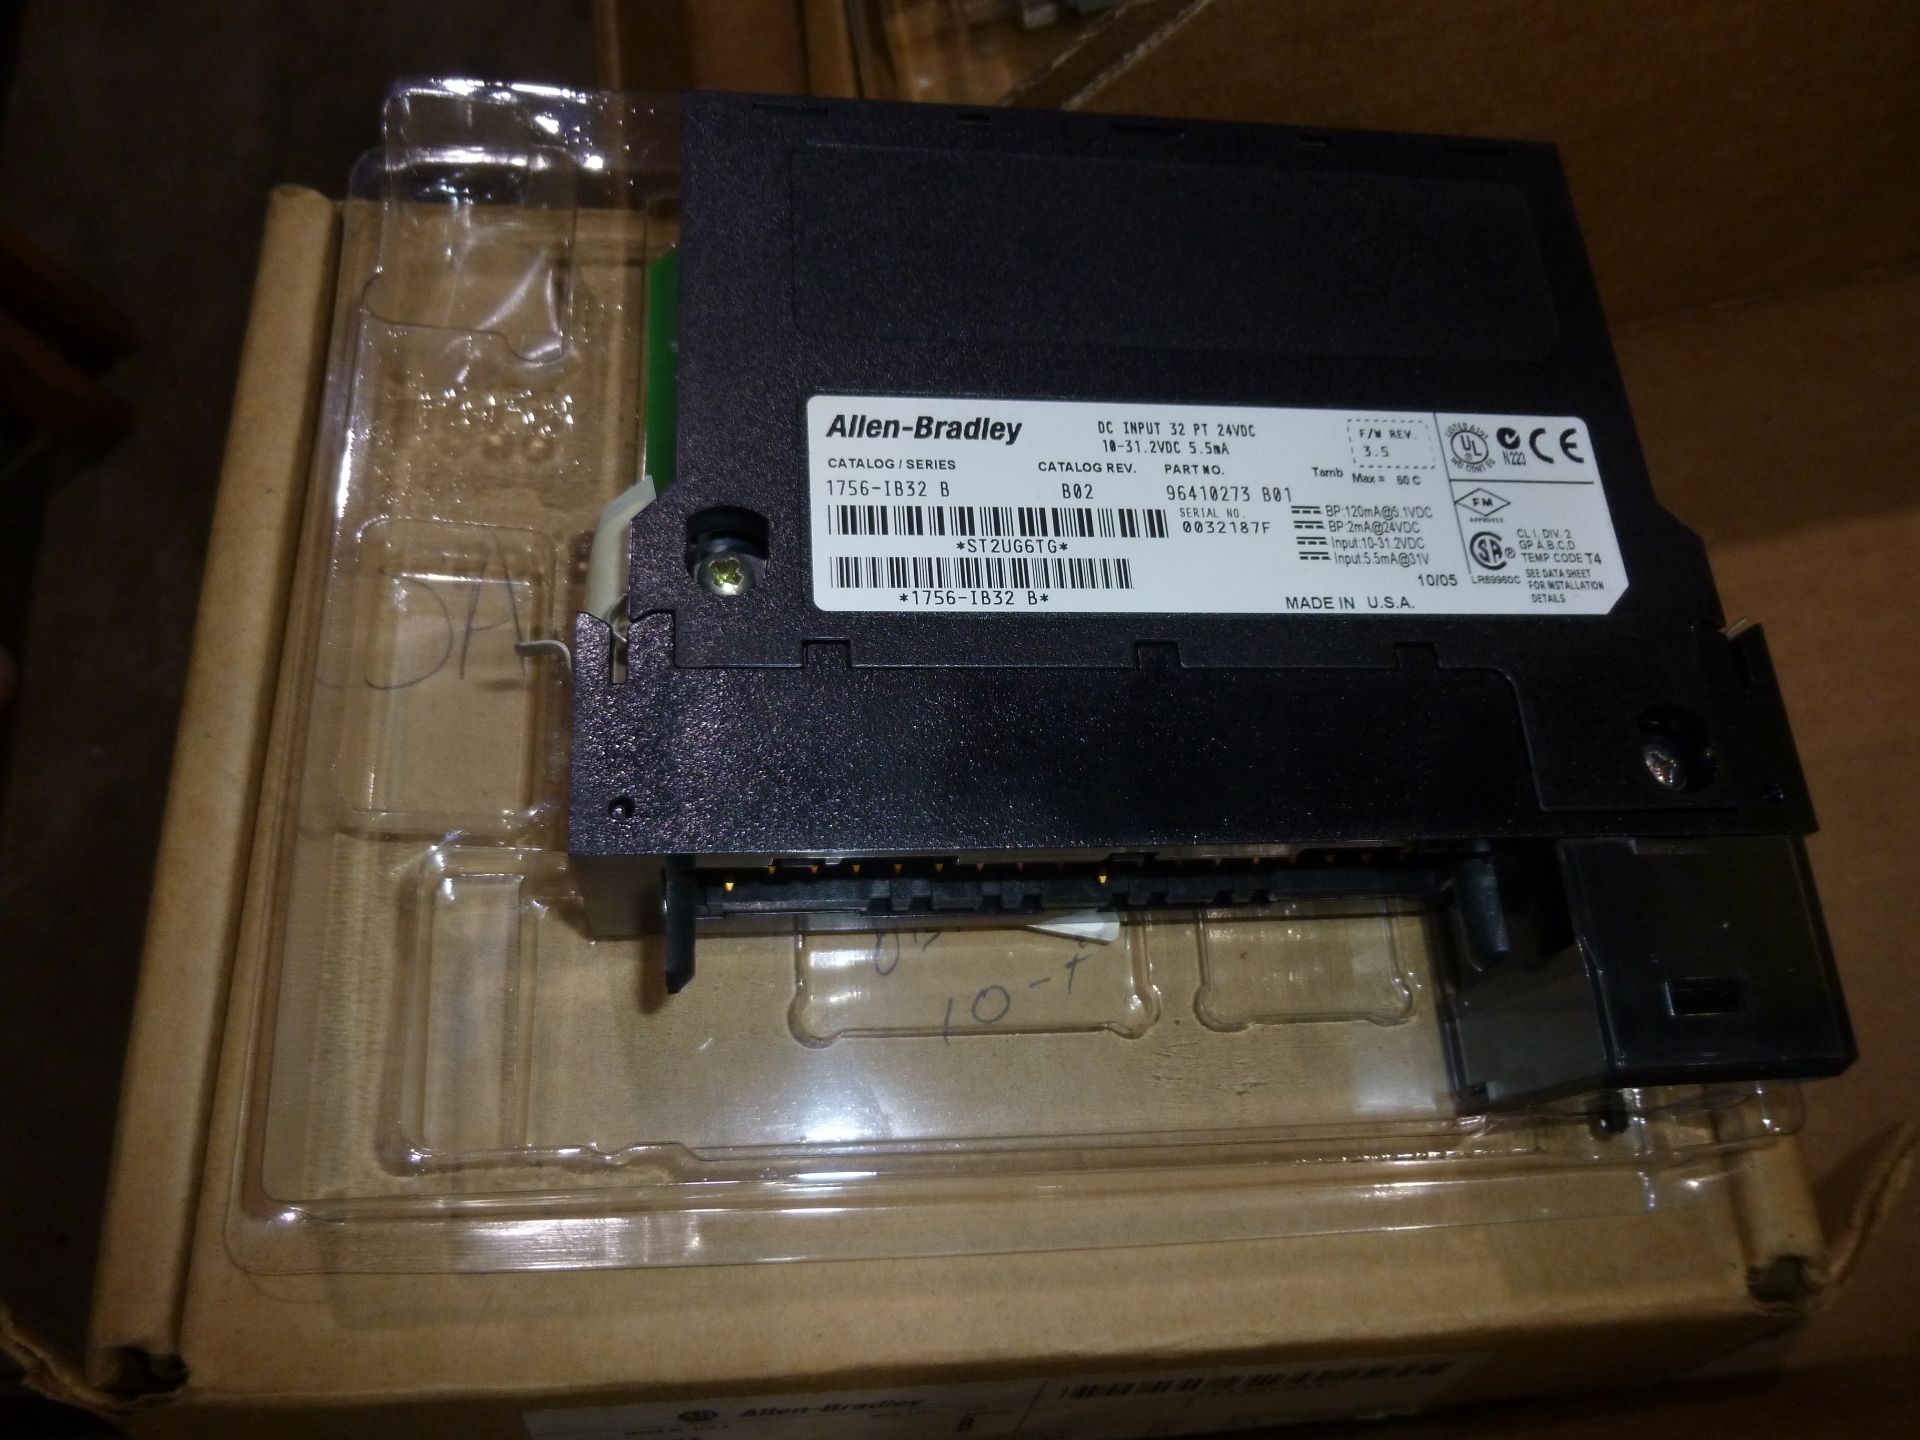 Allen Bradley model 1756IB32, as always with Brolyn LLC auctions, all lots can be picked up from - Image 3 of 3